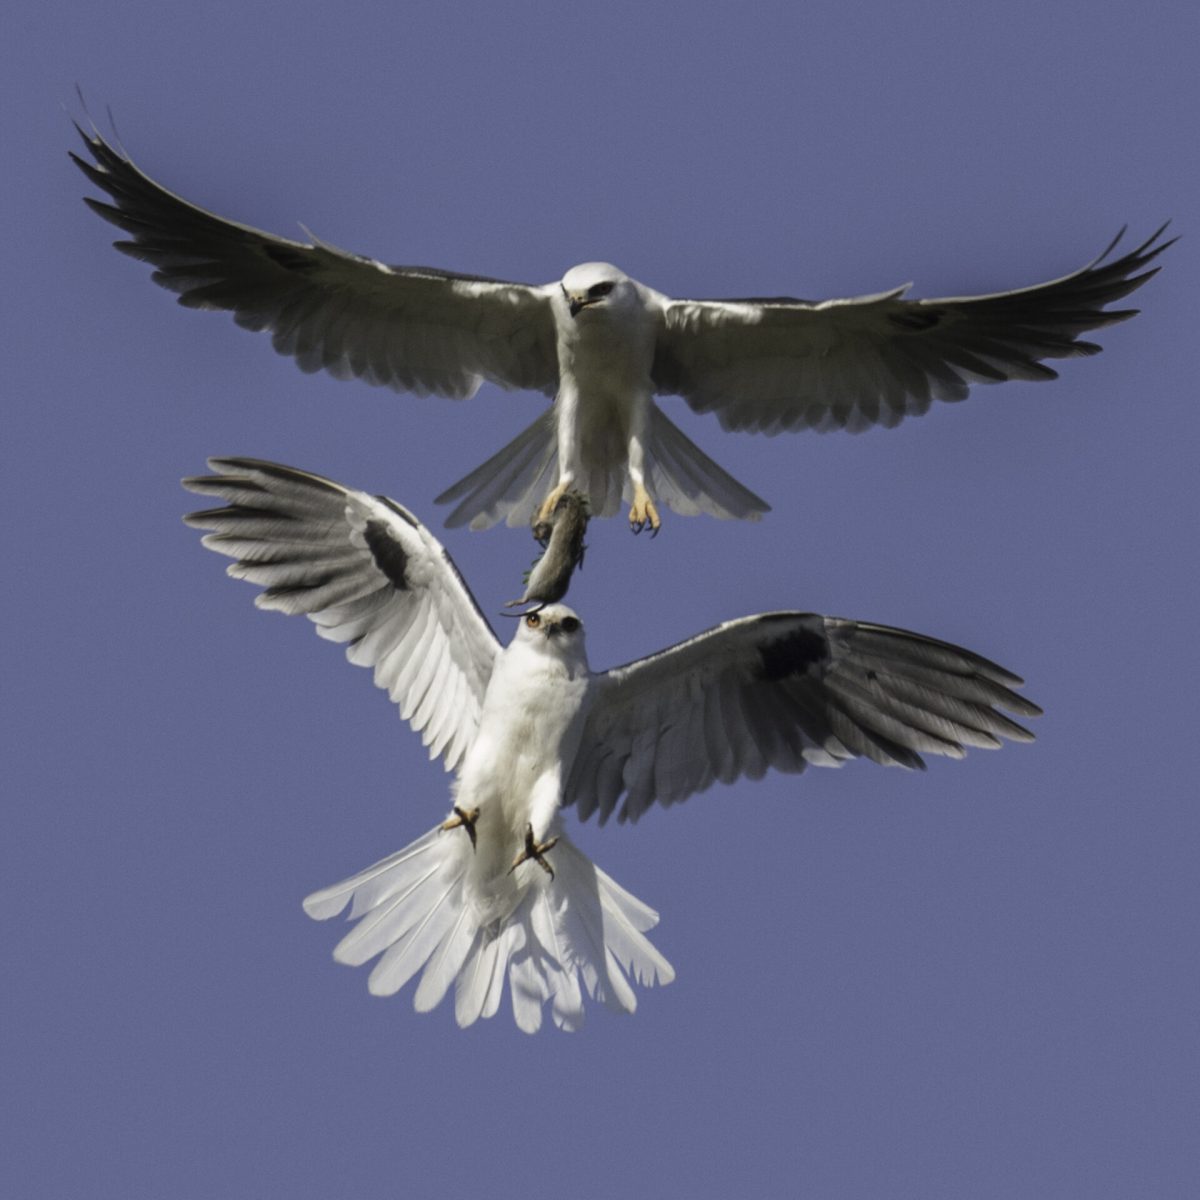 Adult White-tailed Kites exchange Vole on way to feed young, Marina, Berkeley